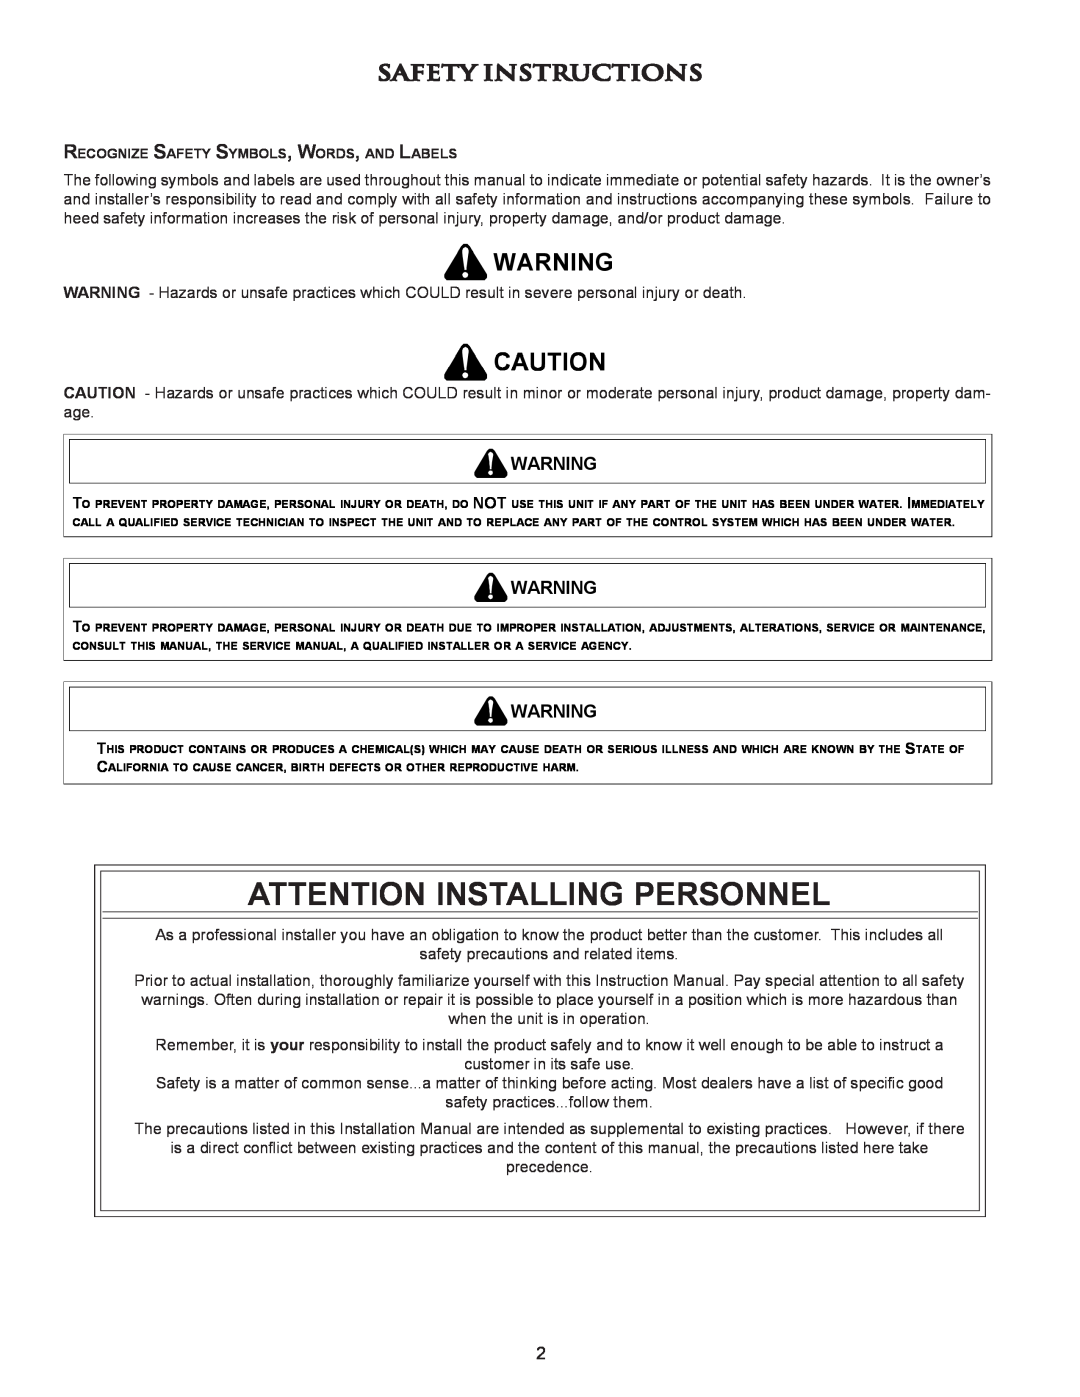 Amana 10730418 installation instructions Safety Instructions, Attention Installing Personnel 